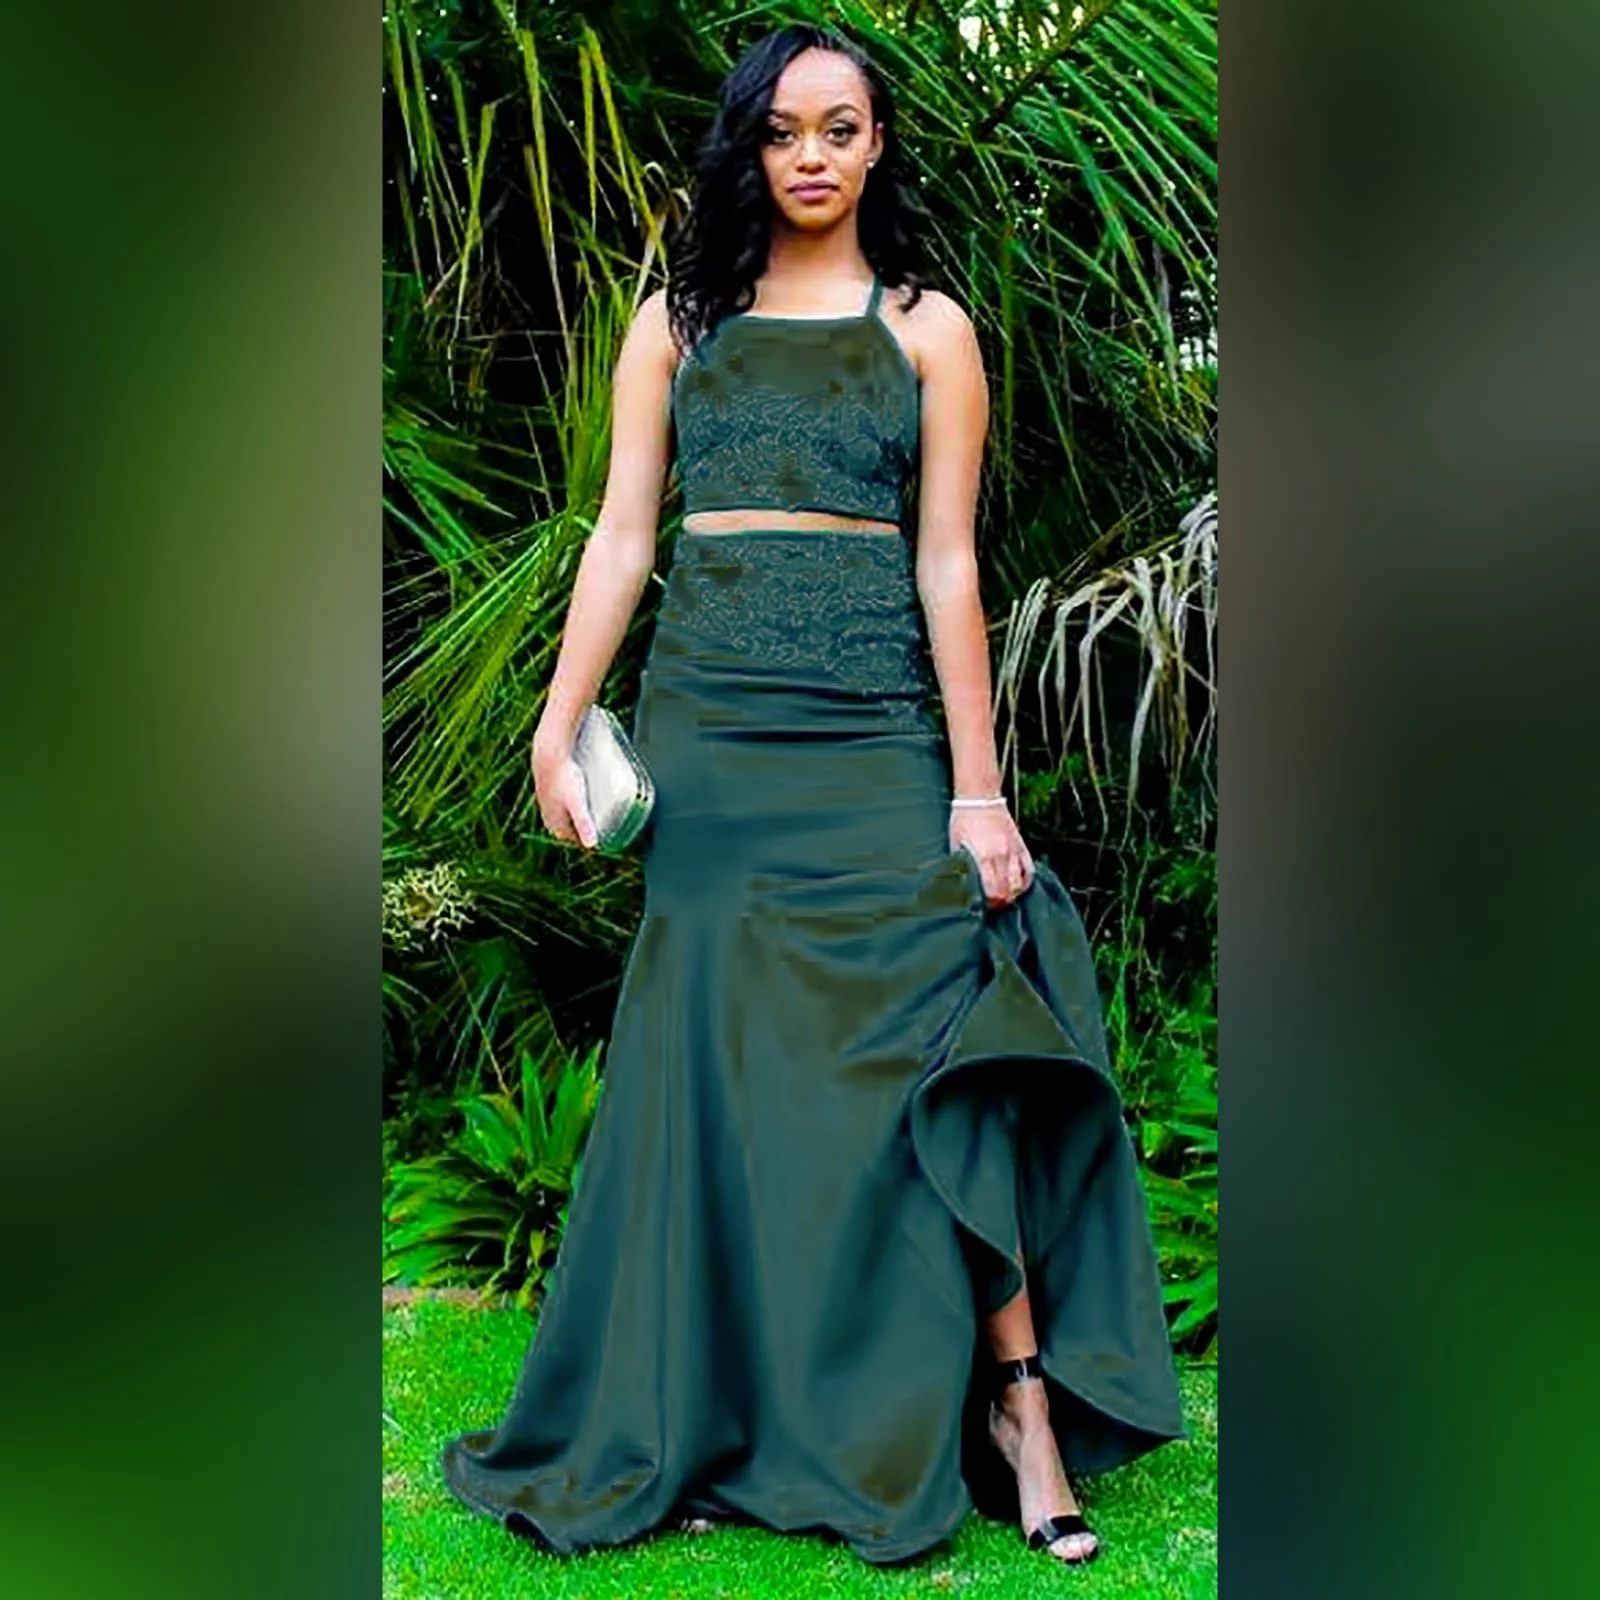 2 piece emerald green mermaid prom dress 2 2 piece emerald green mermaid prom dress. A gorgeous crop top with a lace-up open back, with a mermaid skirt. Lace detail on skirt and top for a classic touch.